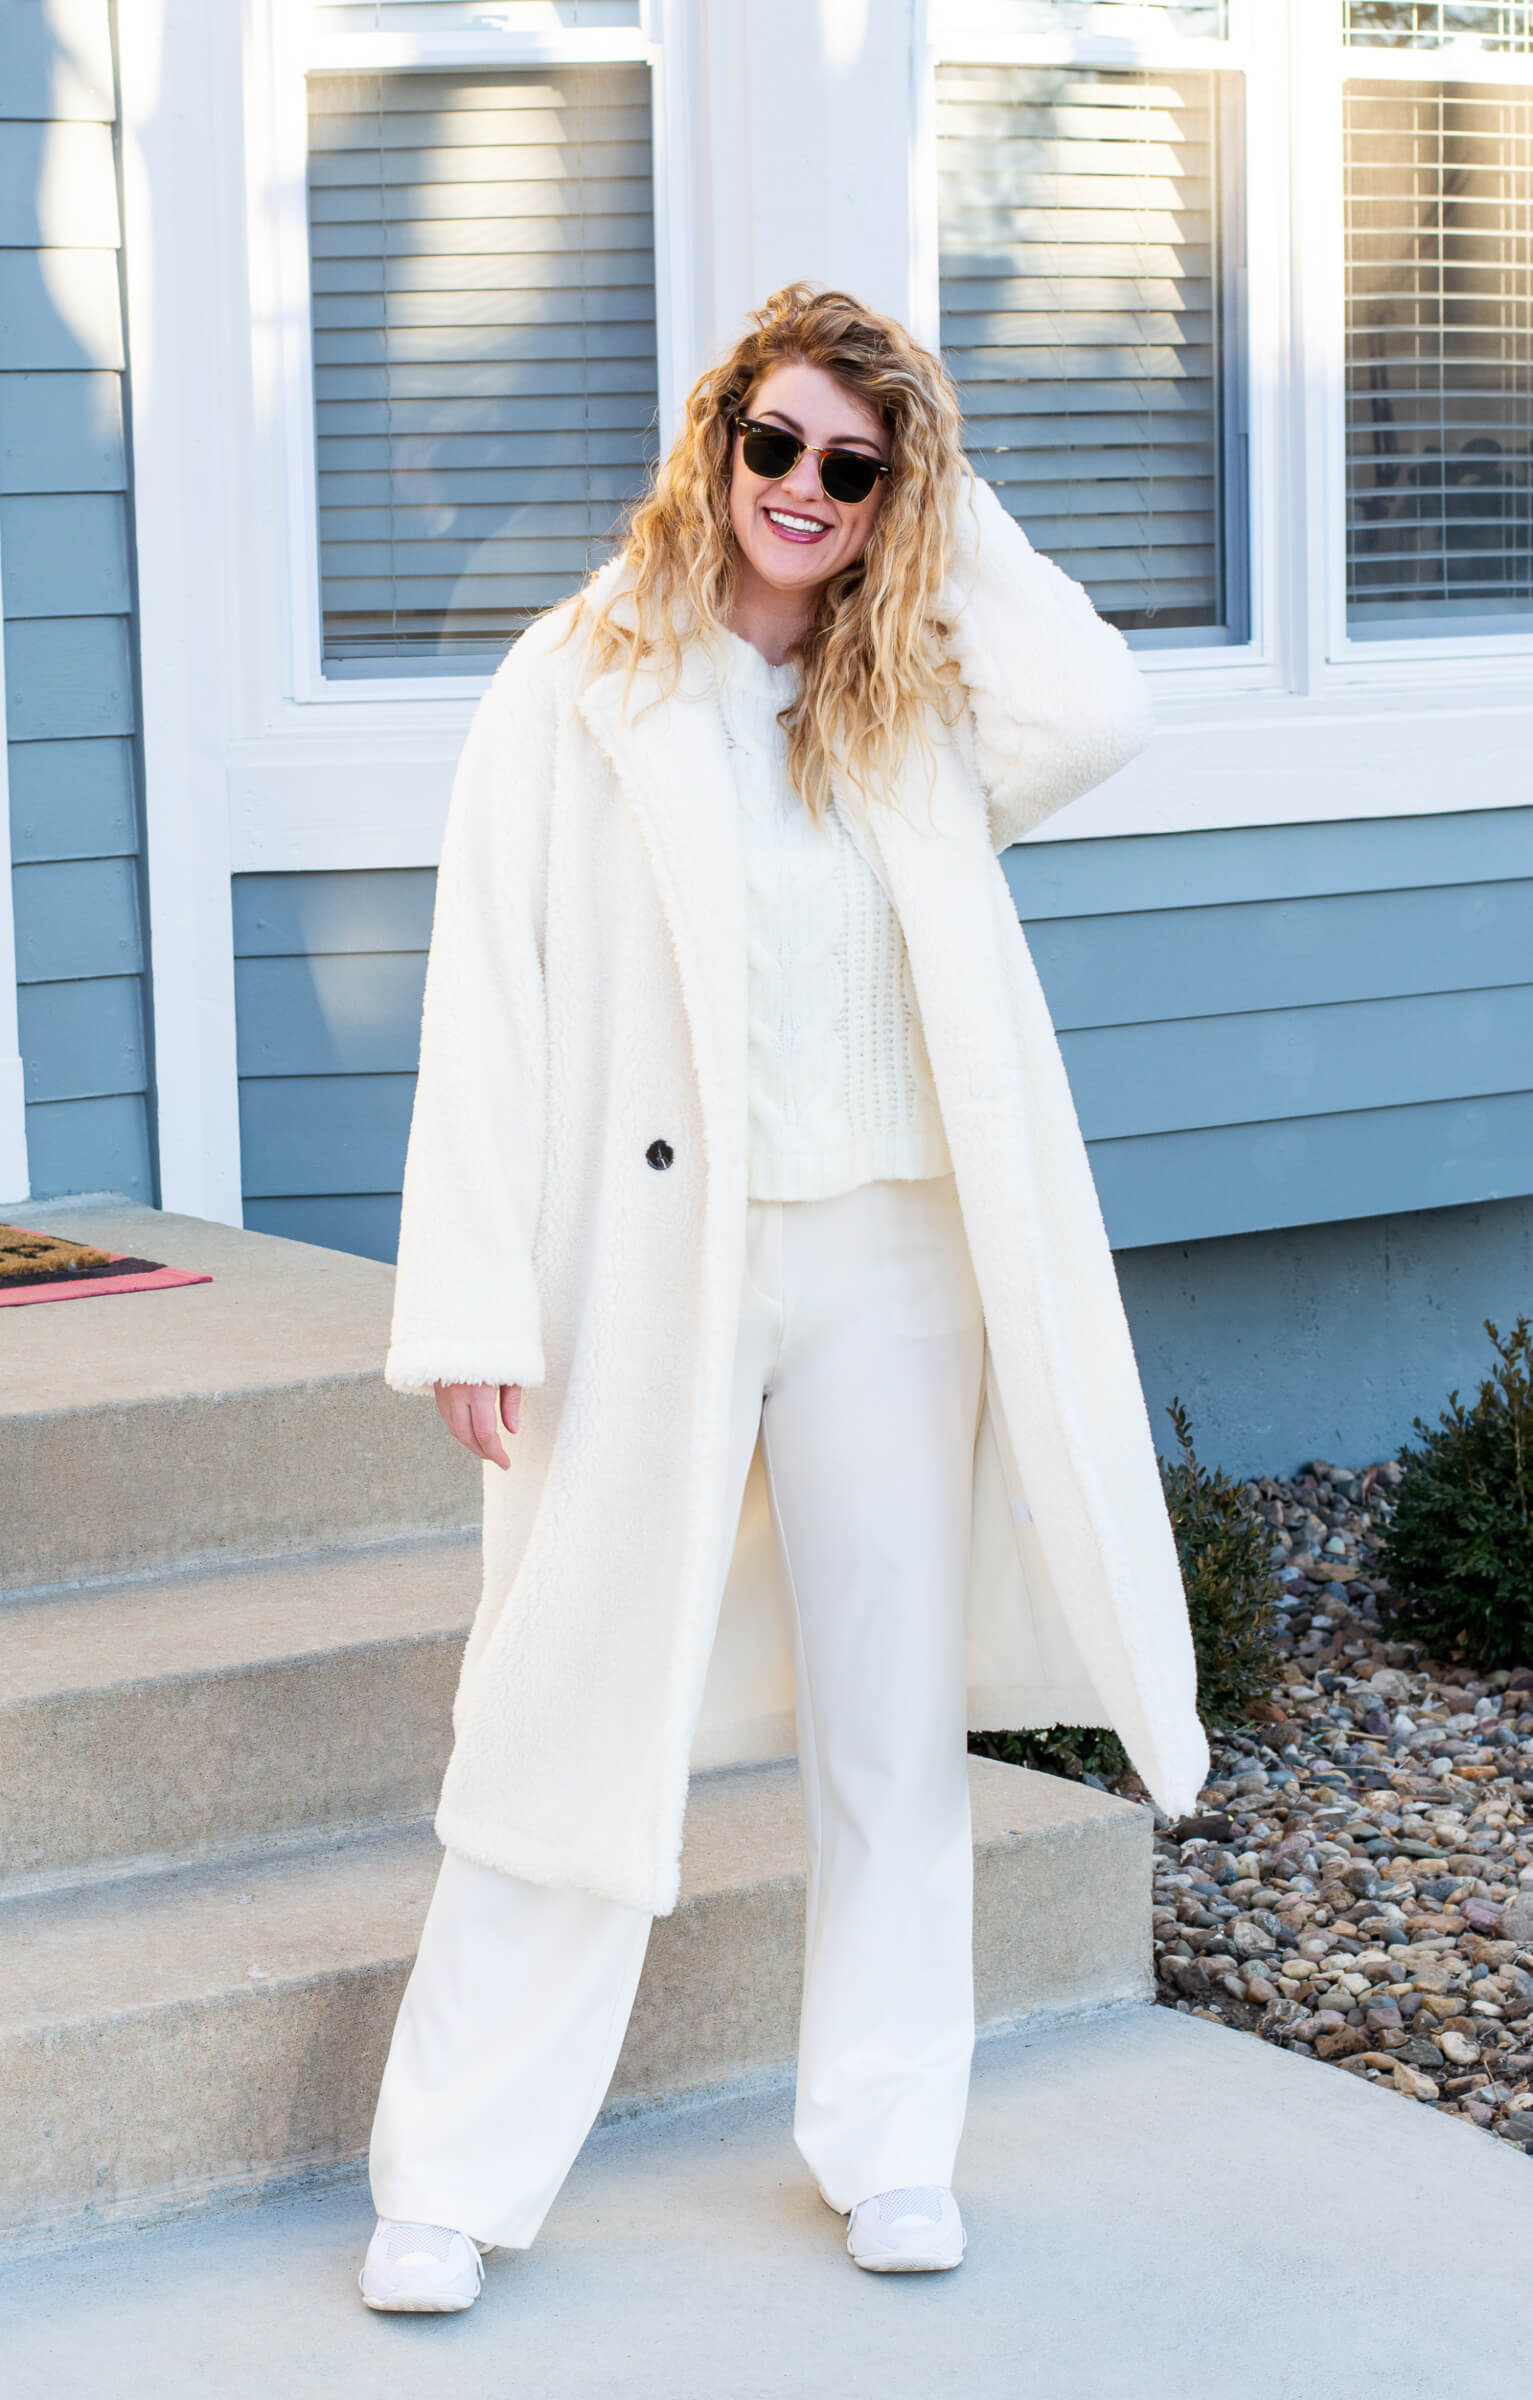 All-Winter White Outfit + Chunky Sneakers. | LSR